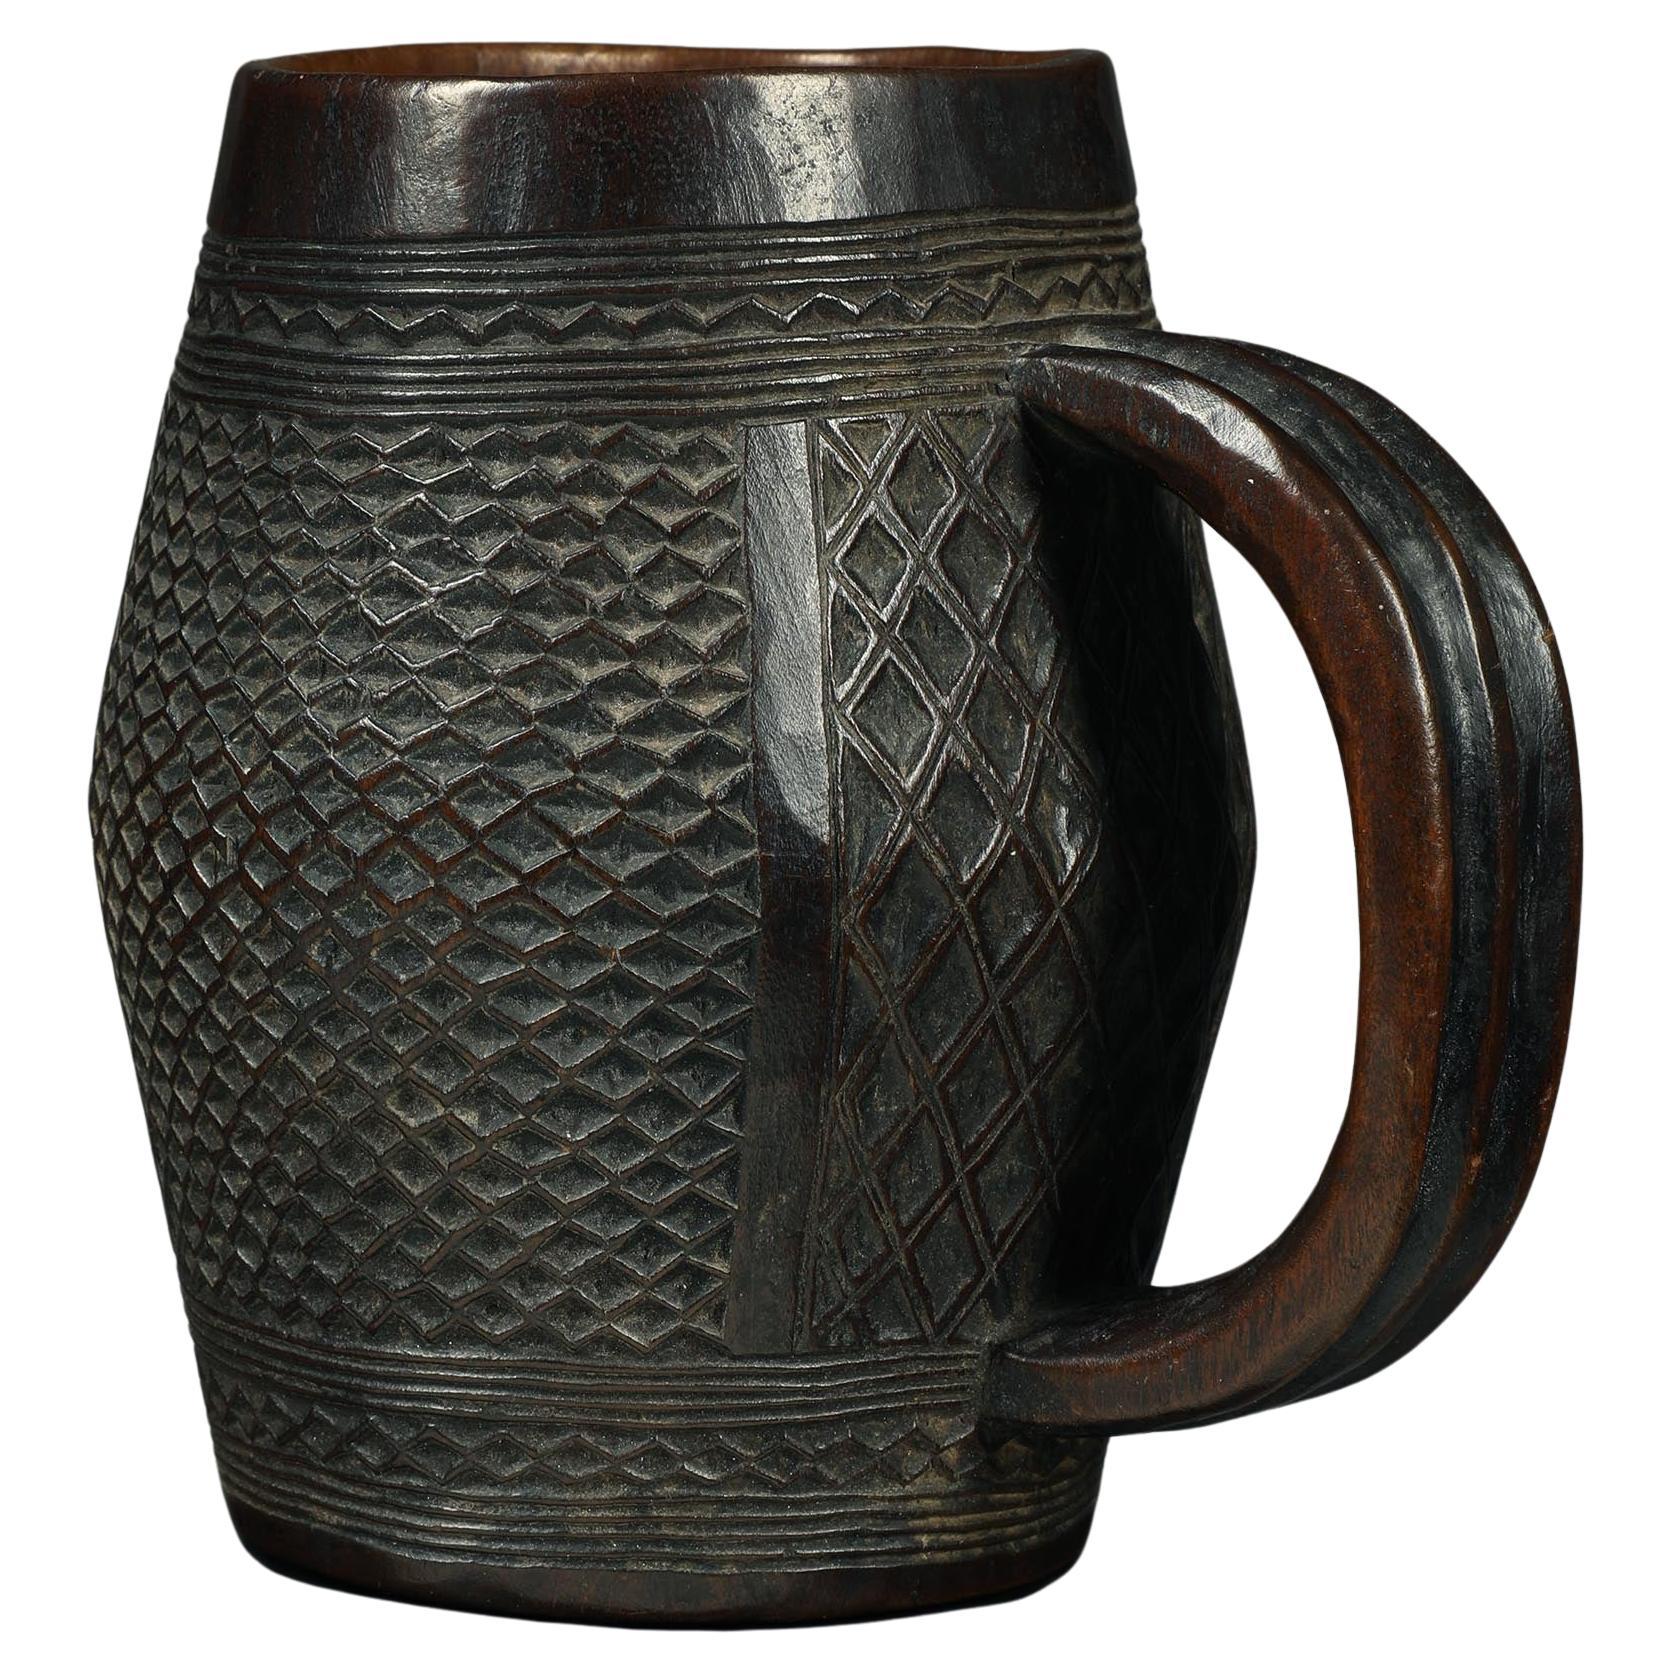 Fine Kuba Cup with Incised Textile Designs, early 20th century Central Africa 